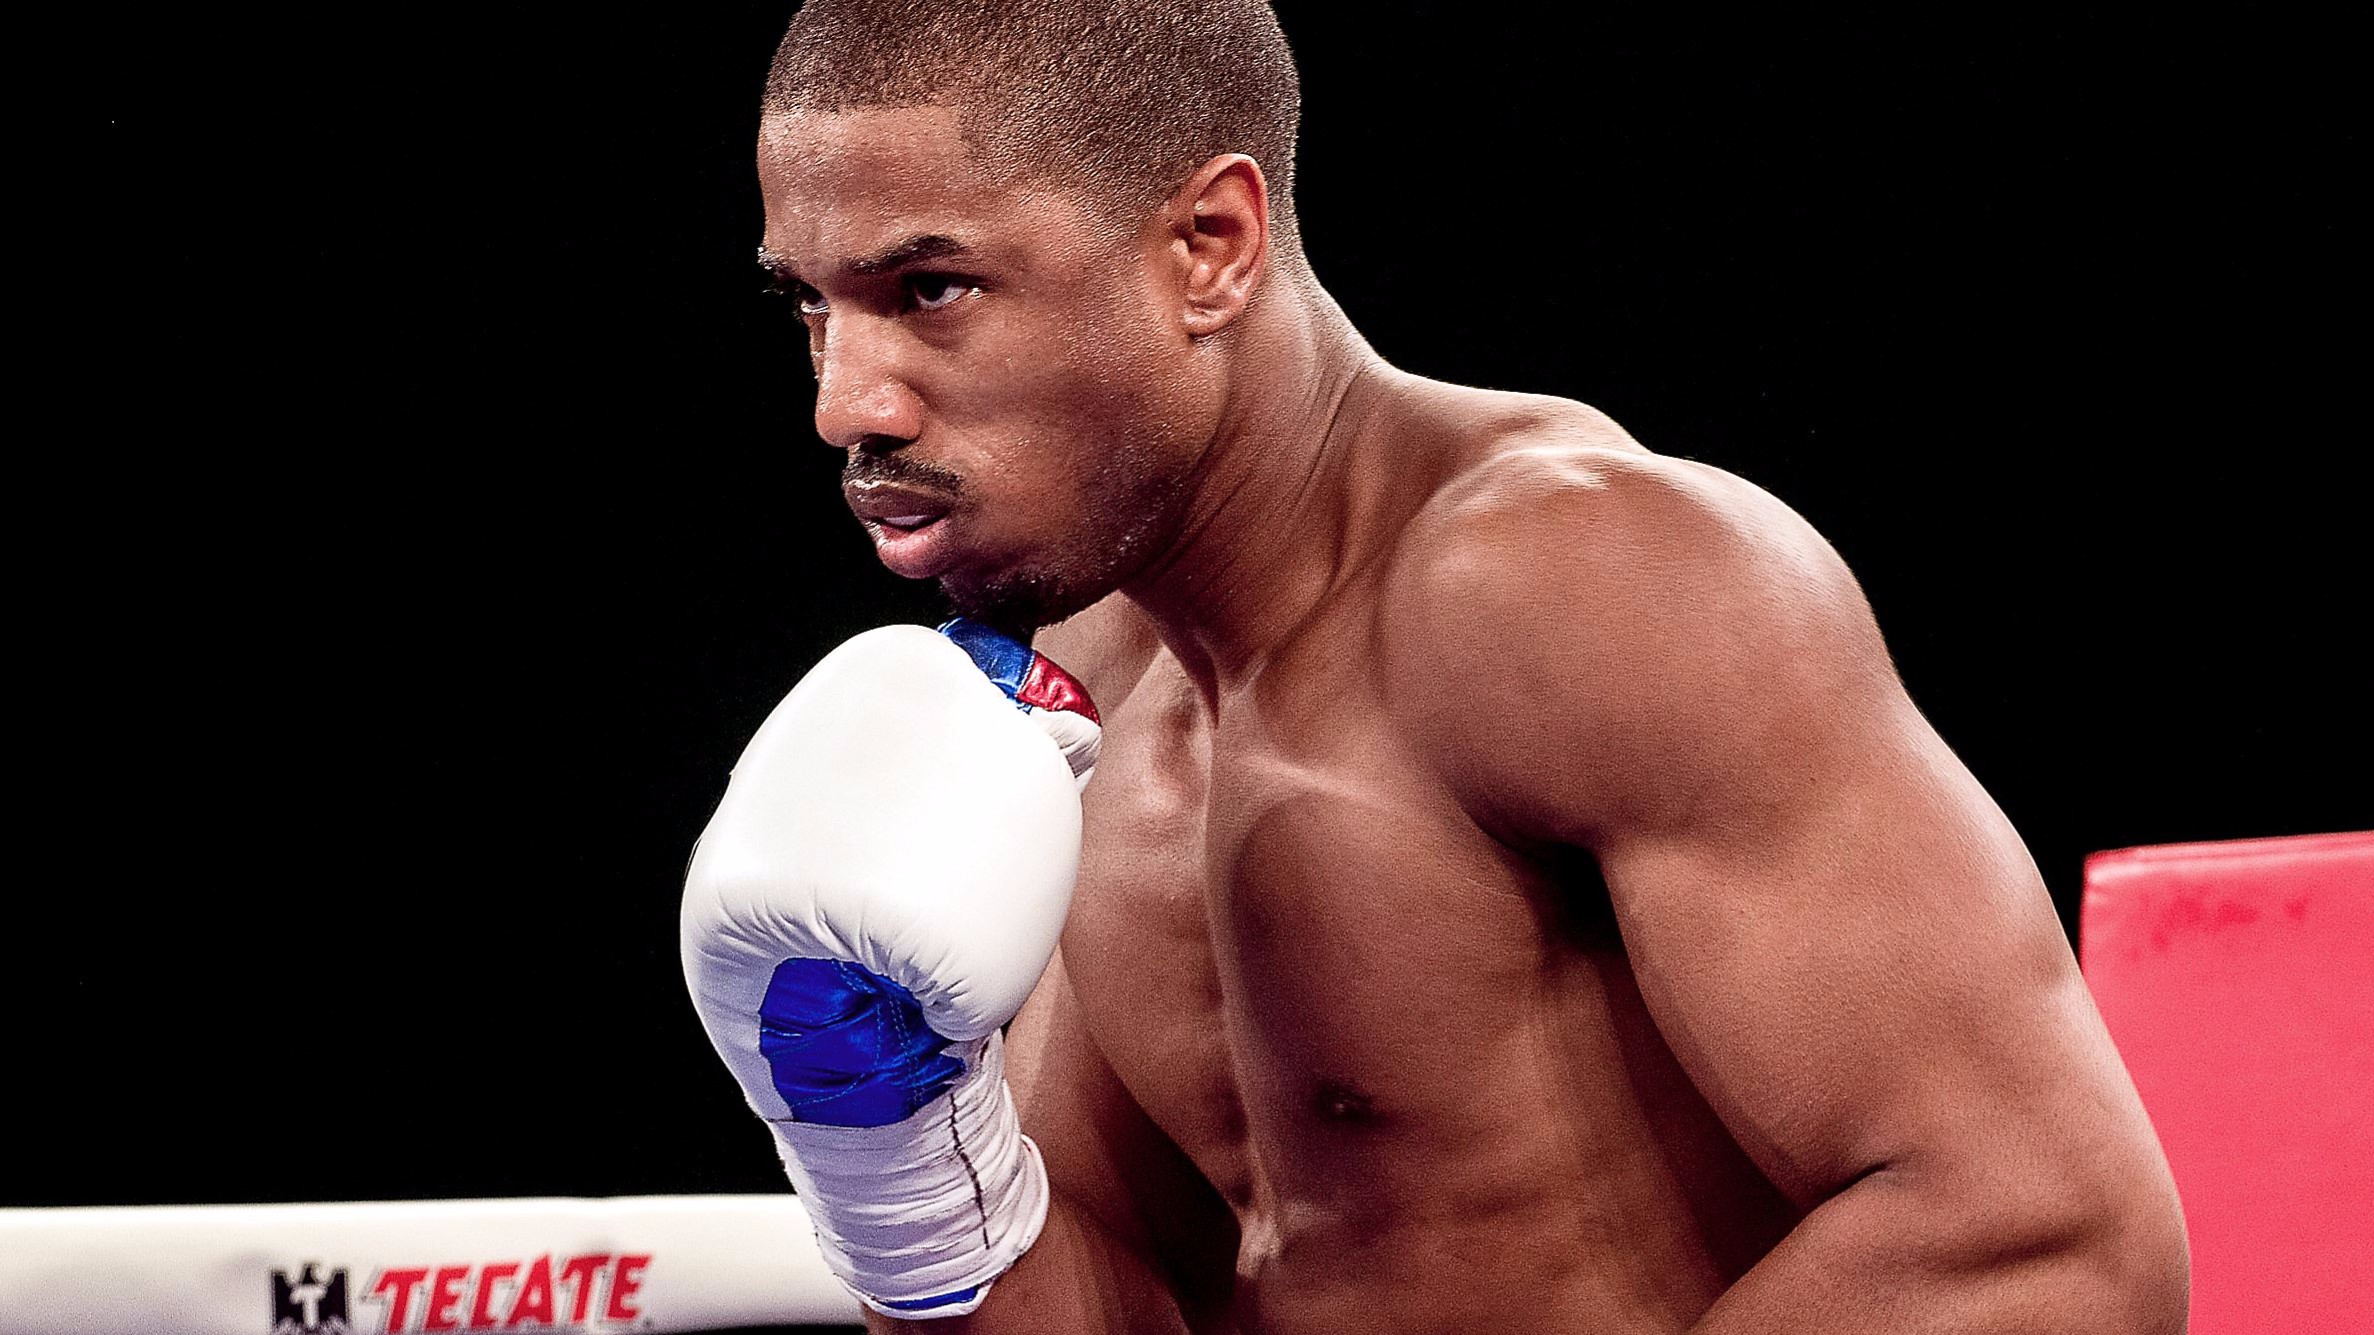 ‘CREED’: BEHOLD THE ASCENSION OF MICHAEL B. JORDAN